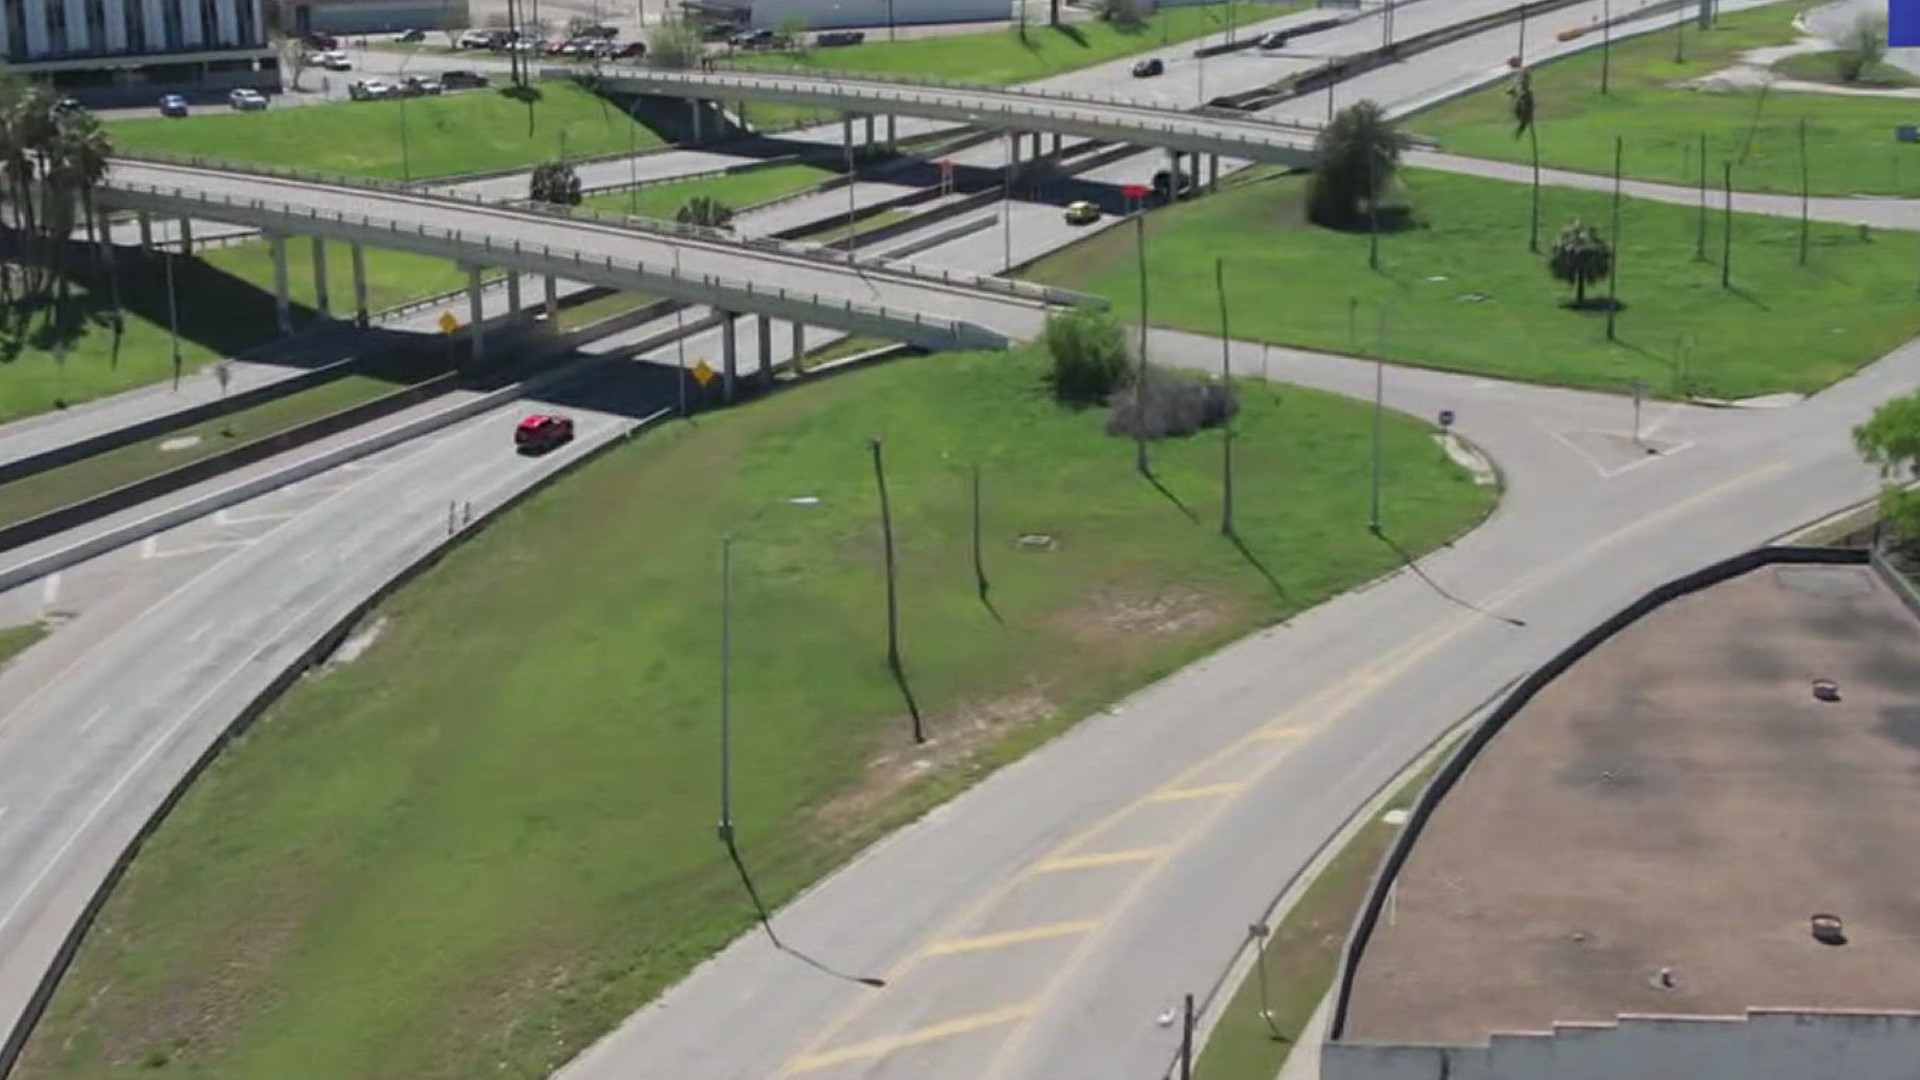 The northwest loop ramp from Martin Luther King Drive to southbound SH-286 will be closed from 9 p.m. to midnight Tuesday. The closure will only be for one night.